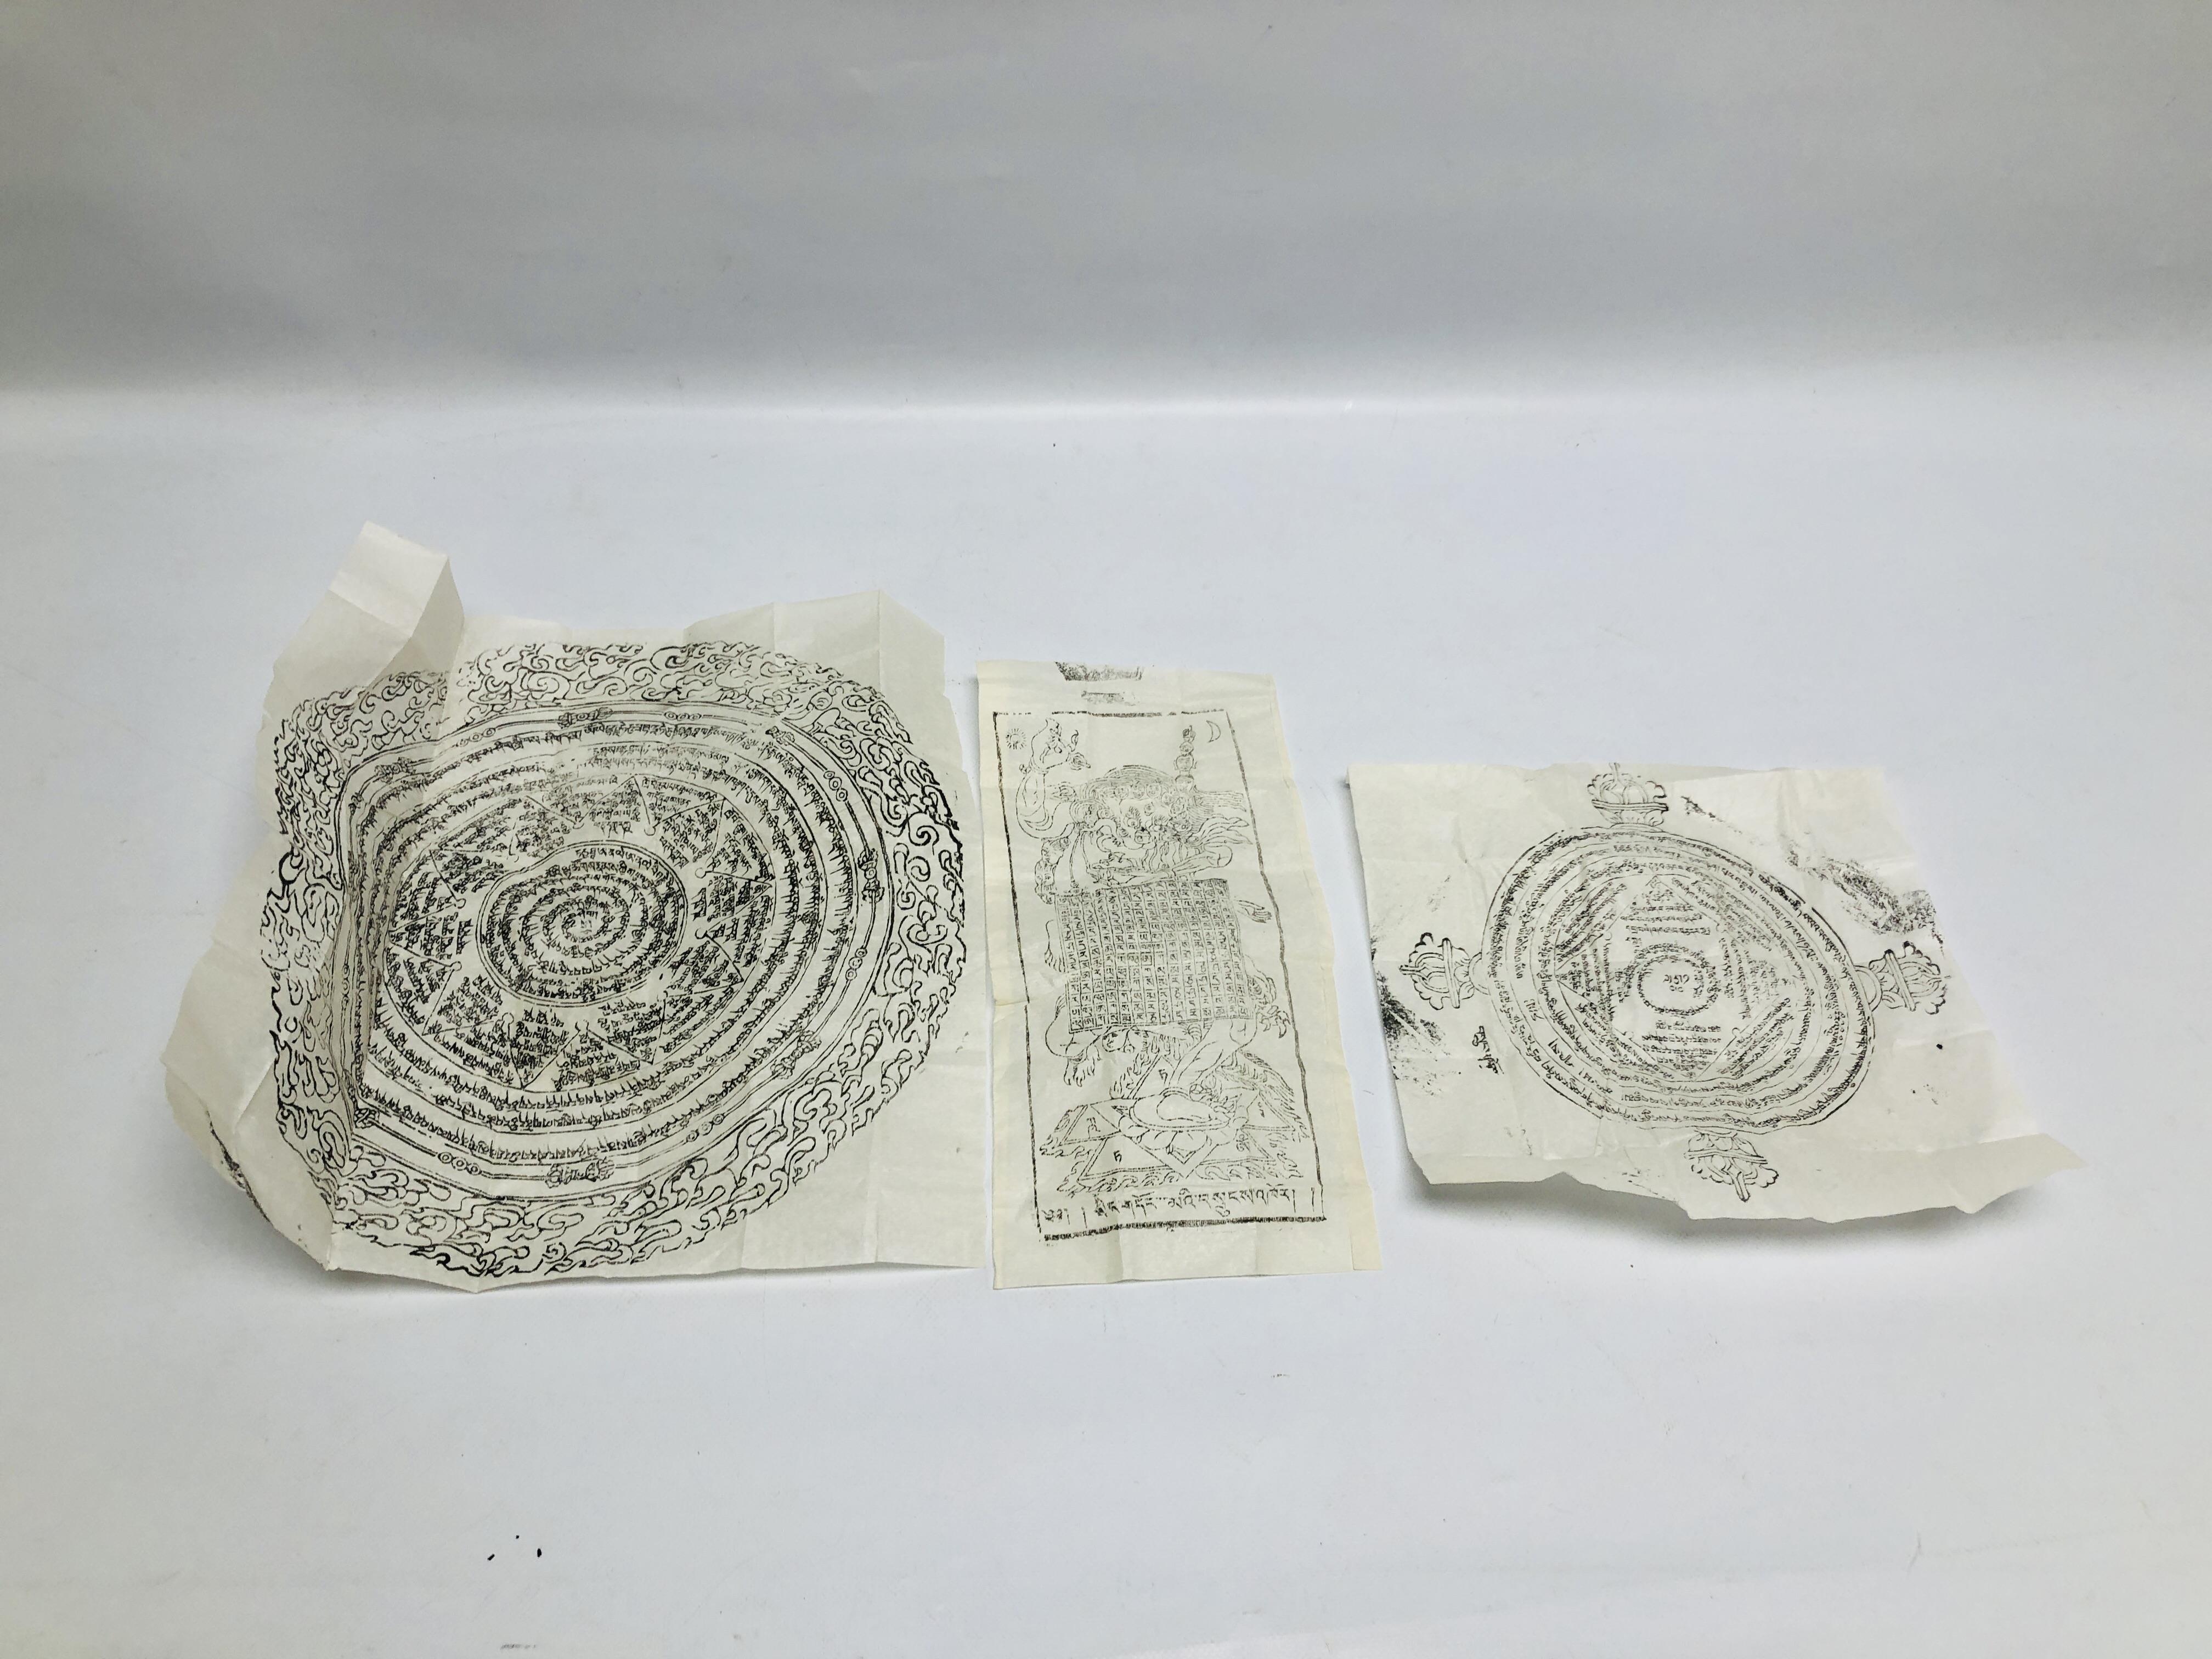 A GROUP OF THREE TIBETAN BUDDHIST INK DRAWINGS ON RICE PAPER, TWO OF INSCRIBED WHEEL DESIGN,